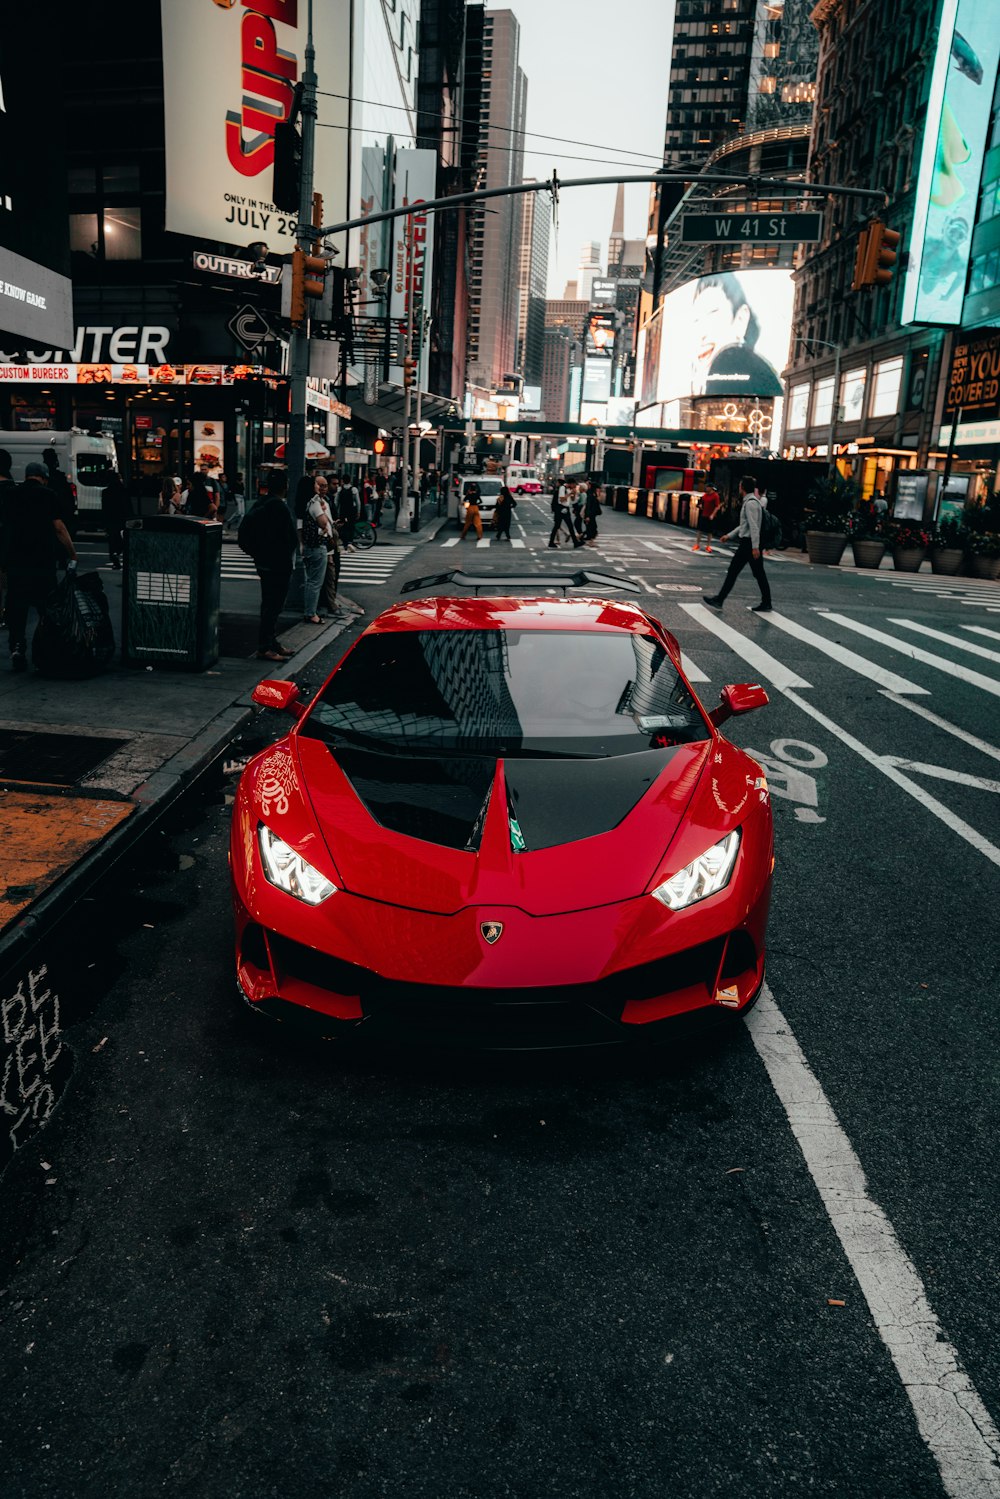 a red sports car on a street